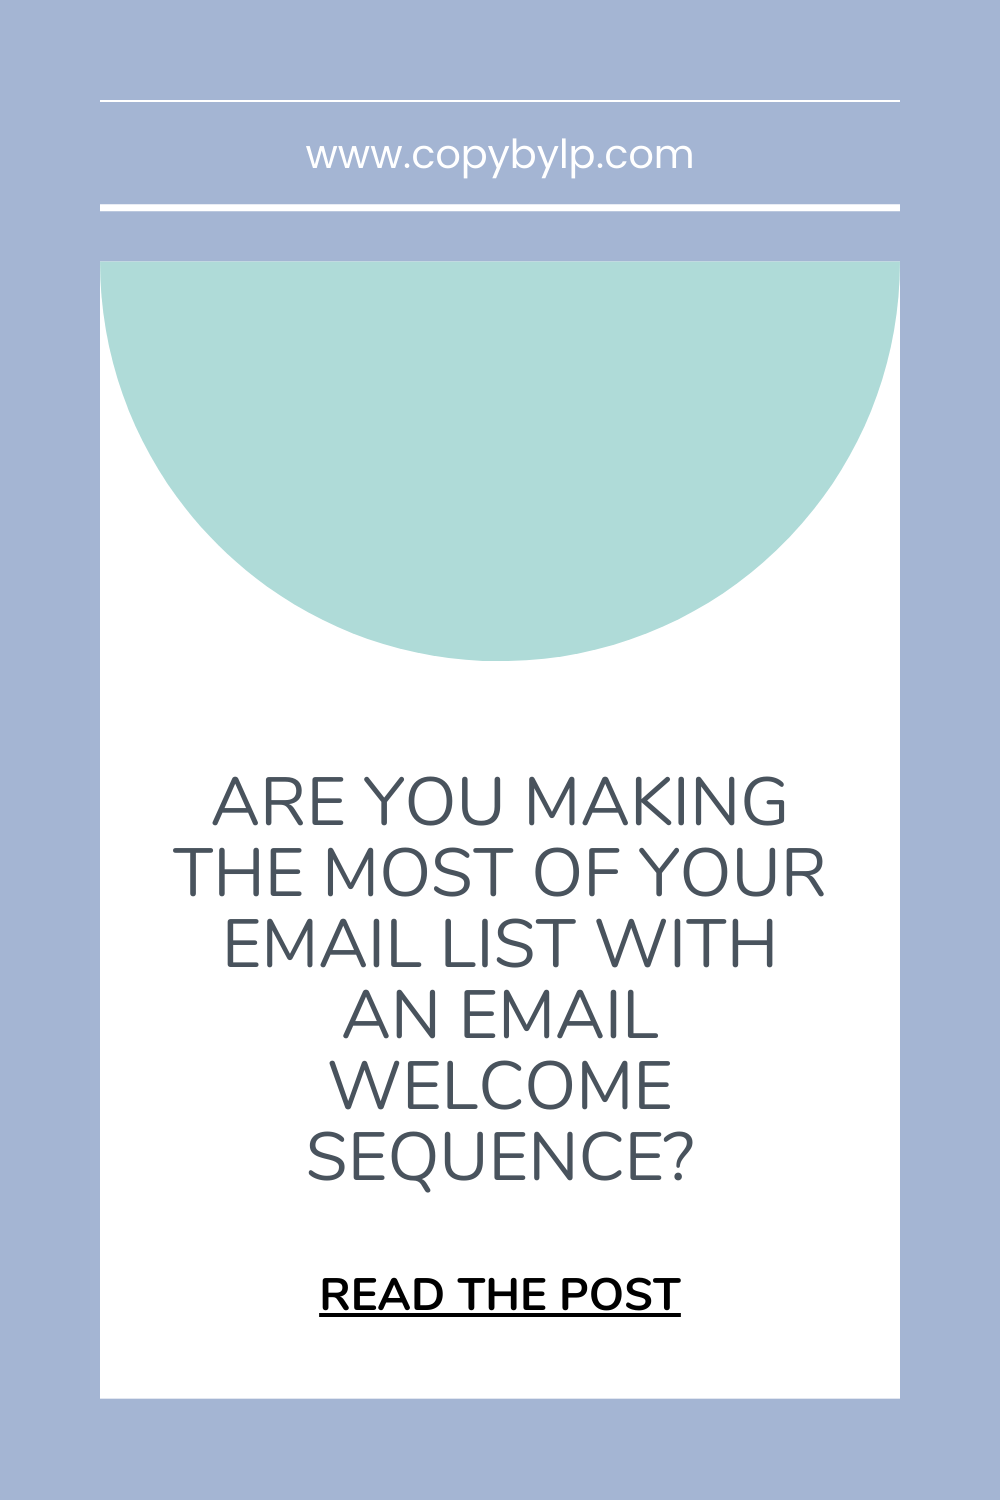 are you making the most of your email list with an email welcome sequence? custom blog title graphic